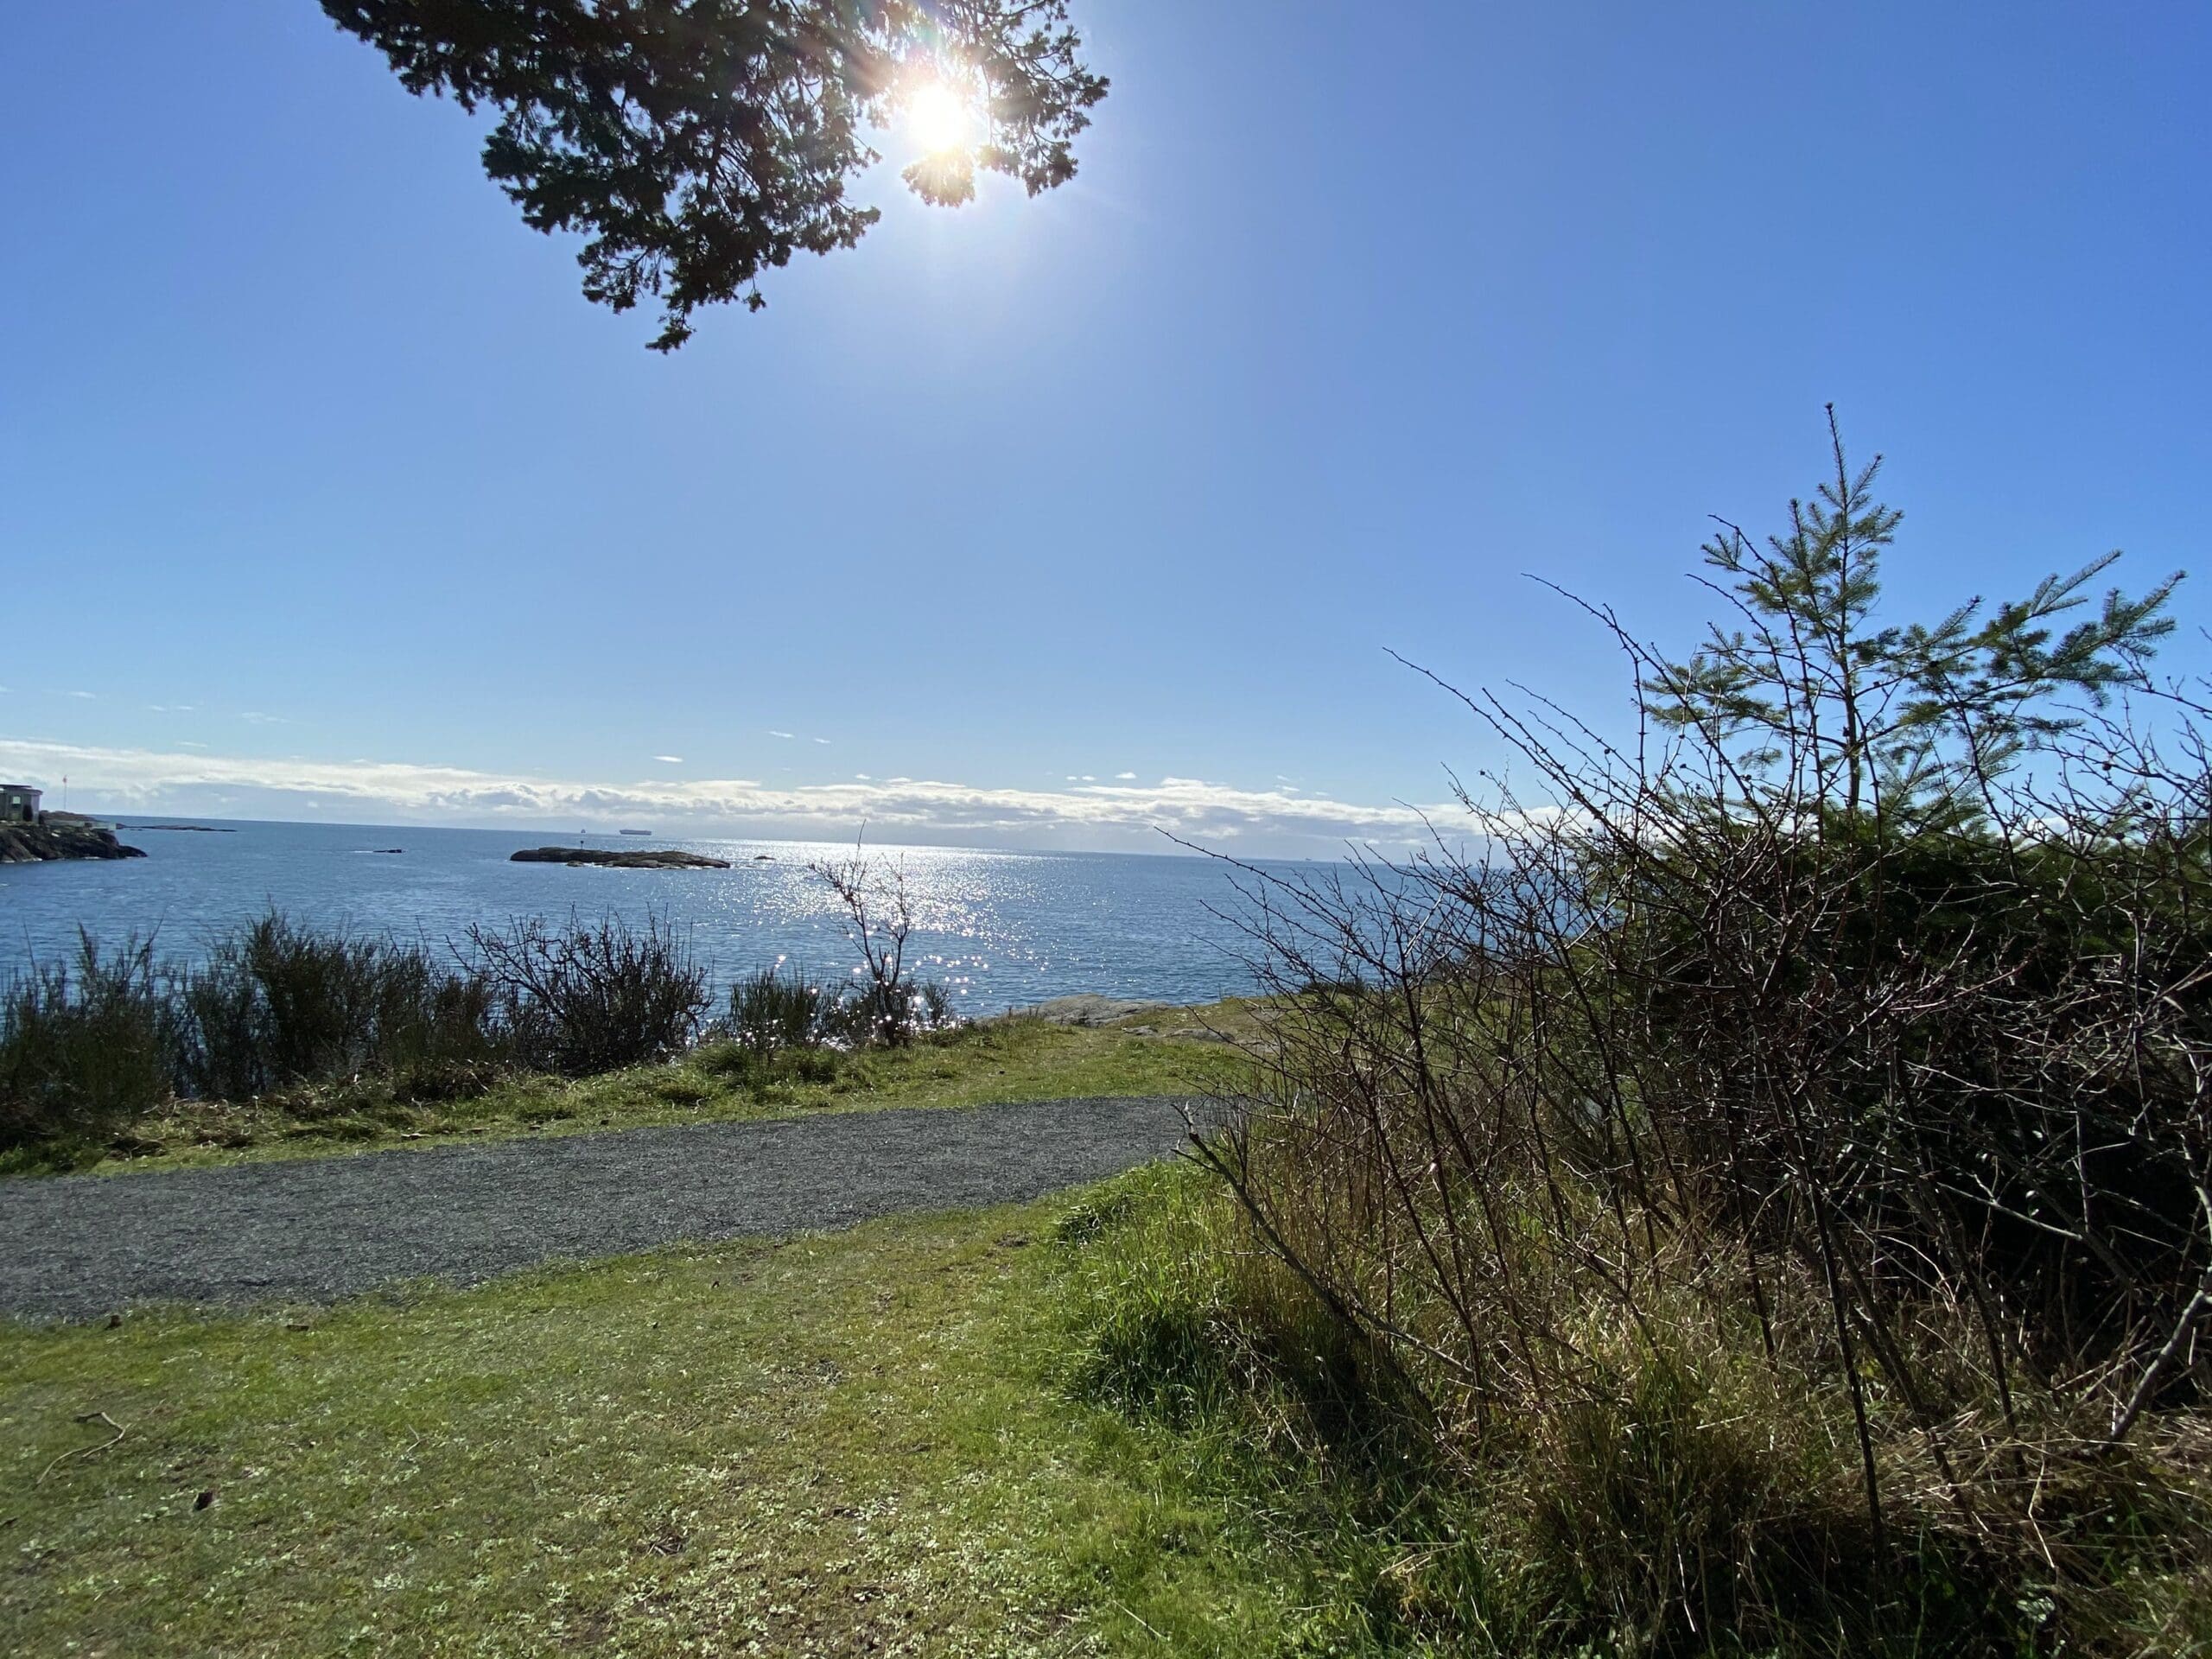 Close to the water, living on an island is a bucket list idea for some people.  This shows a view of the ocean from Saxe Point Park.